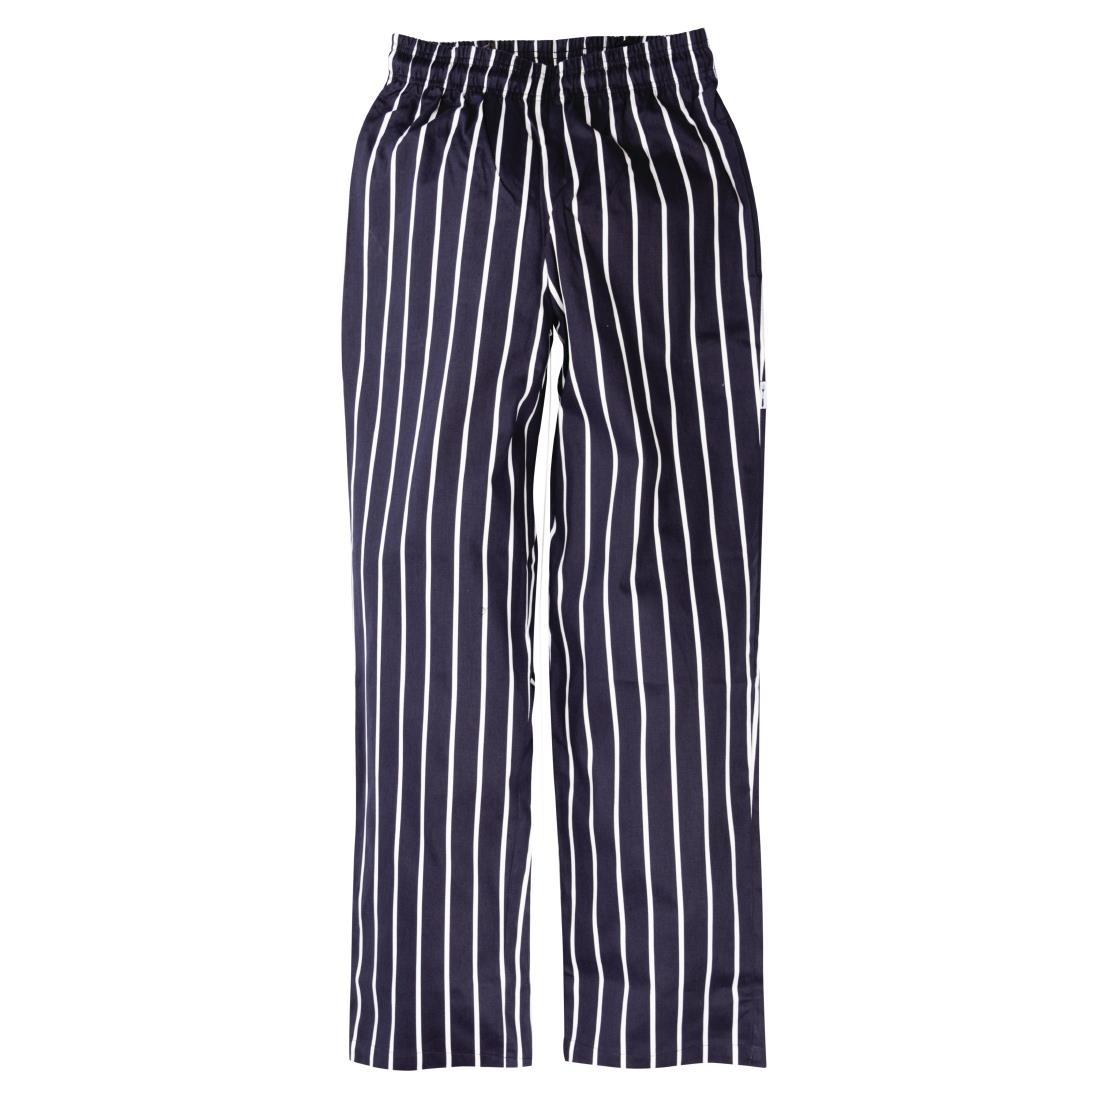 Chef Works Essential Baggy Pant Butchers Stripe L